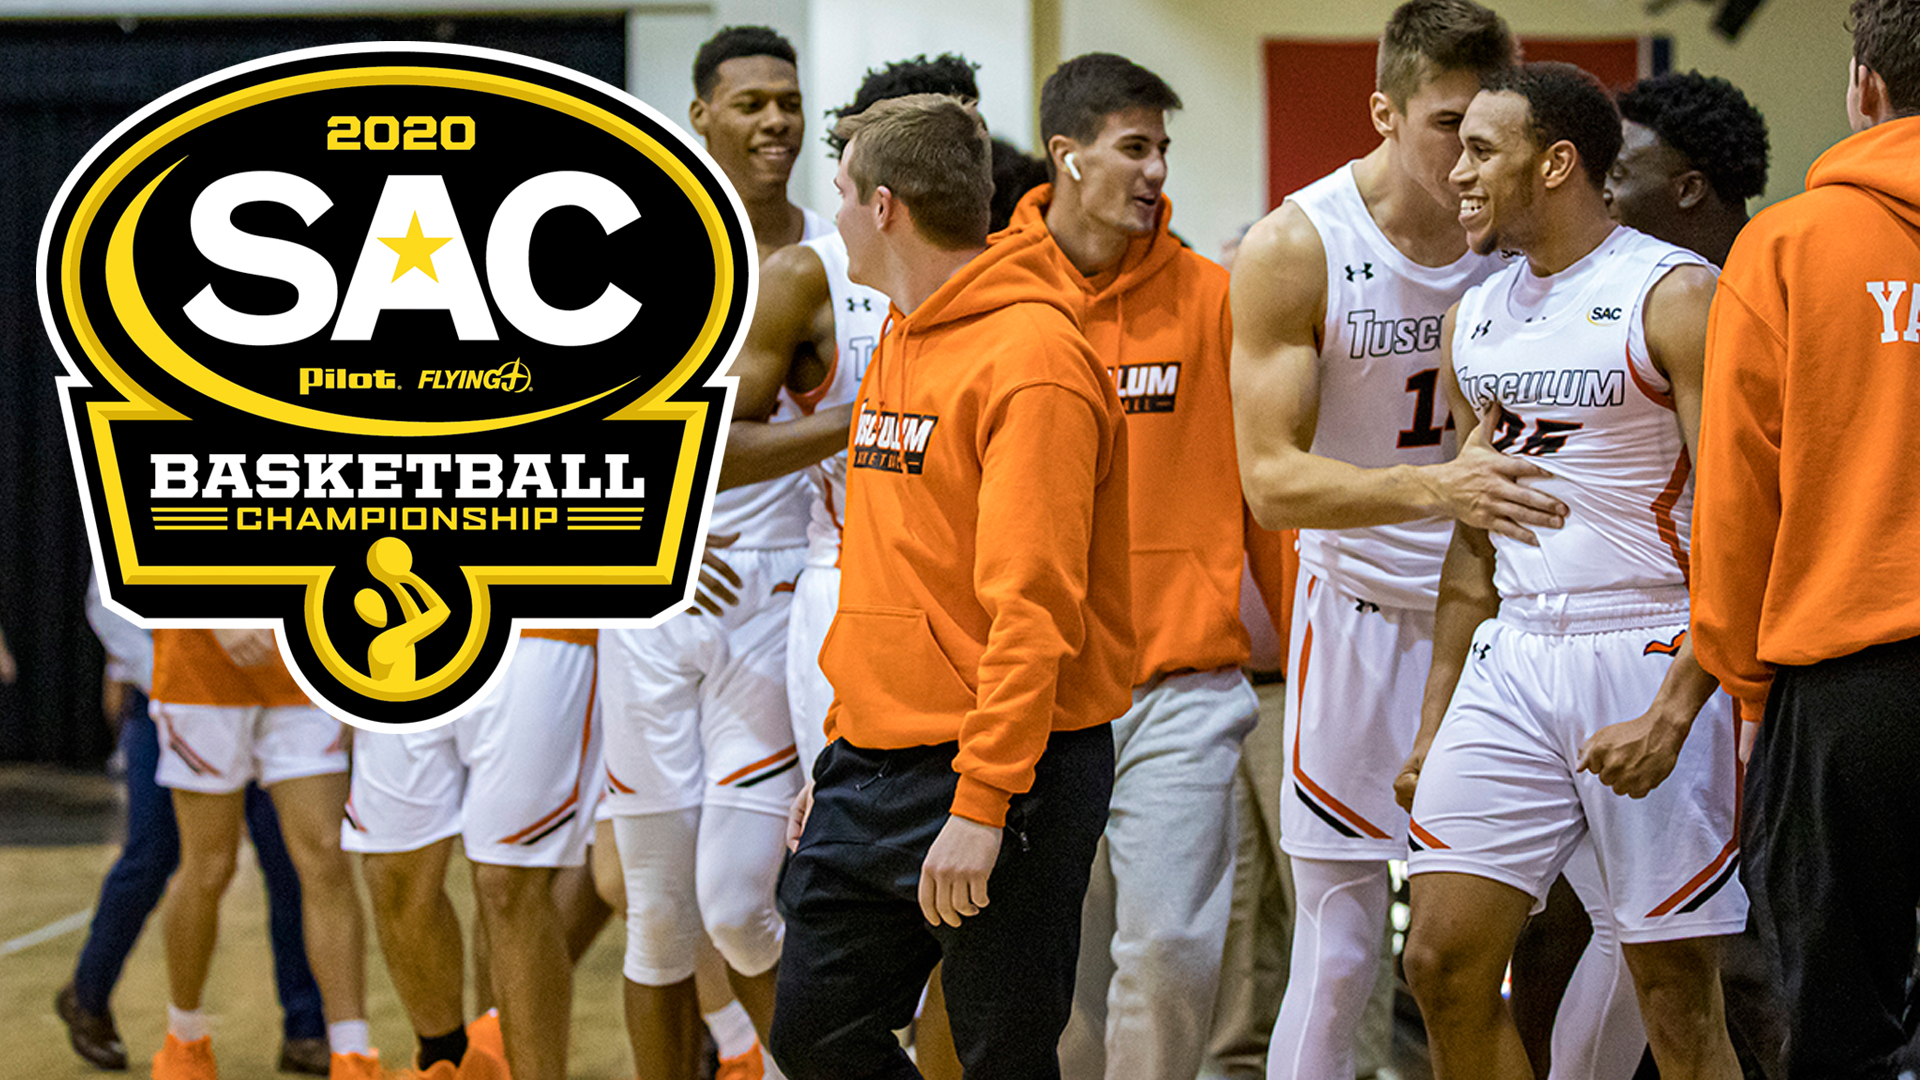 Tusculum seeded fourth in SAC Basketball Tournament, host Anderson Wednesday in quarterfinal